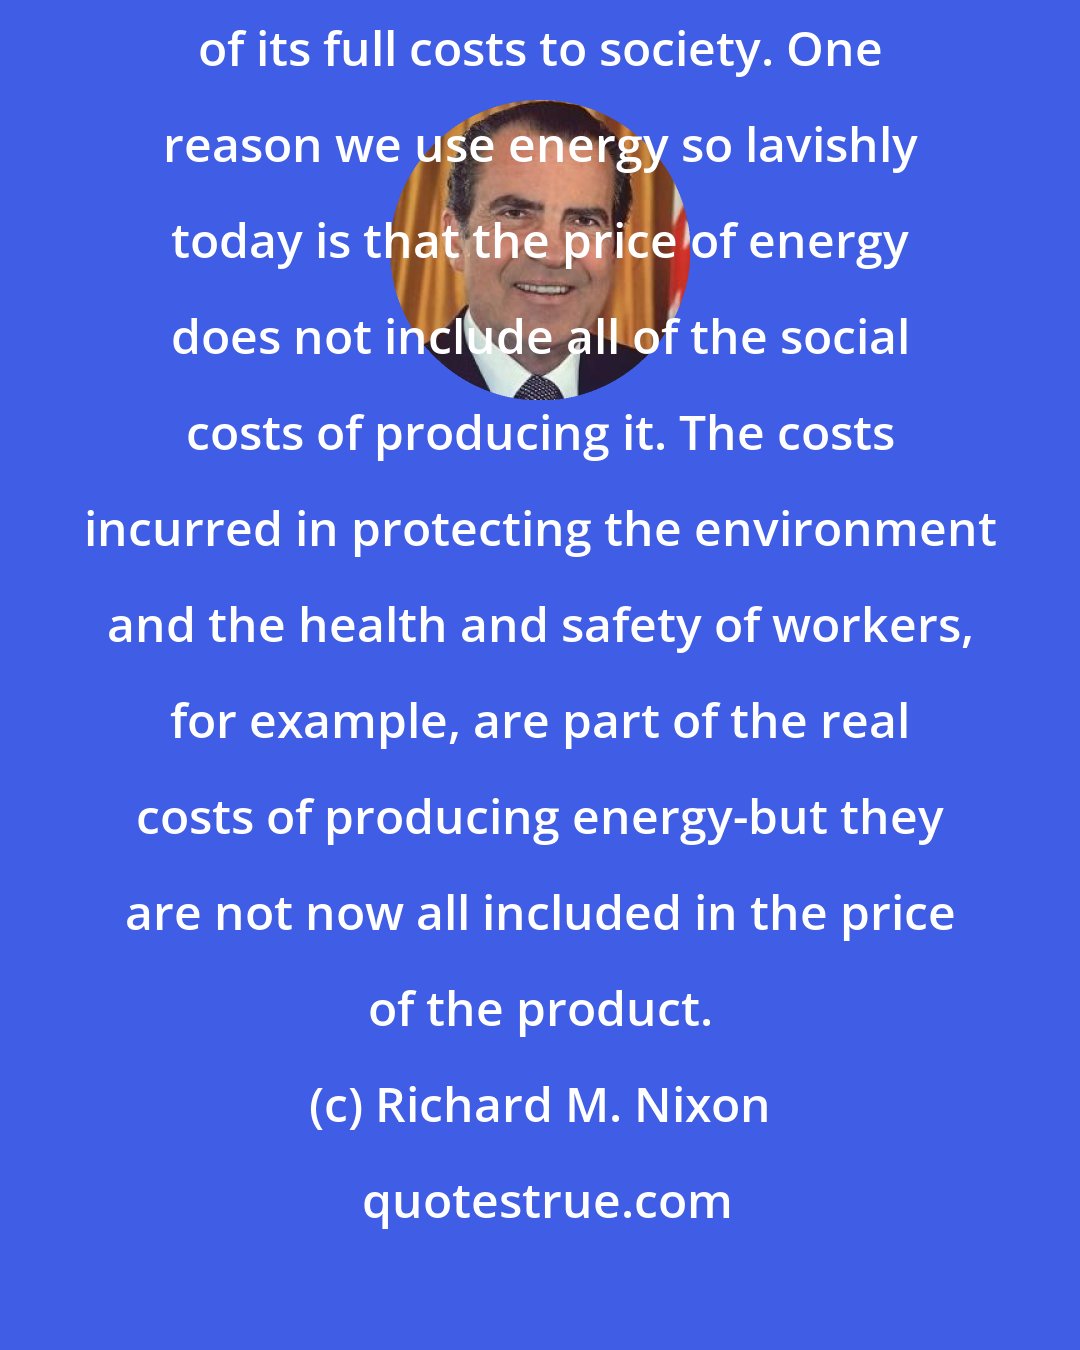 Richard M. Nixon: We believe that part of the answer lies in pricing energy on the basis of its full costs to society. One reason we use energy so lavishly today is that the price of energy does not include all of the social costs of producing it. The costs incurred in protecting the environment and the health and safety of workers, for example, are part of the real costs of producing energy-but they are not now all included in the price of the product.